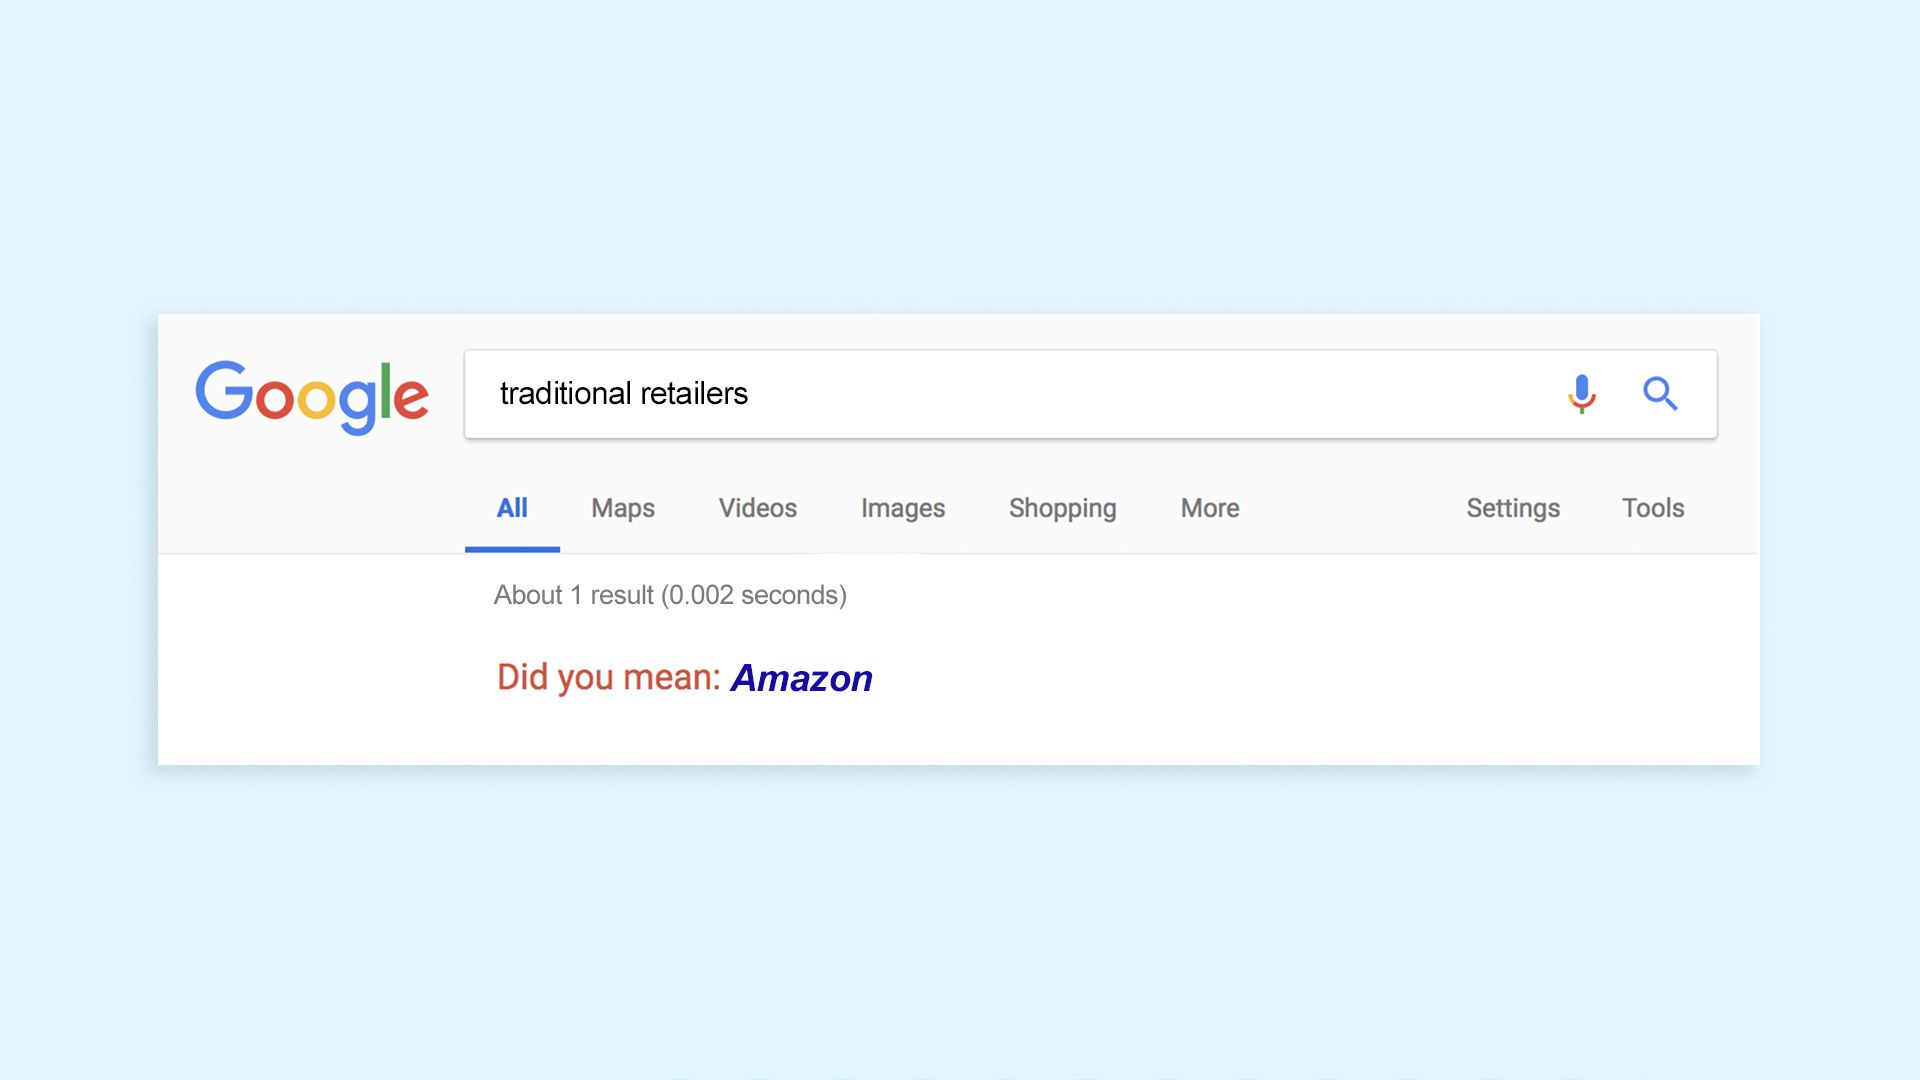 A search engine returns "Amazon" when user searches "traditional retailers"